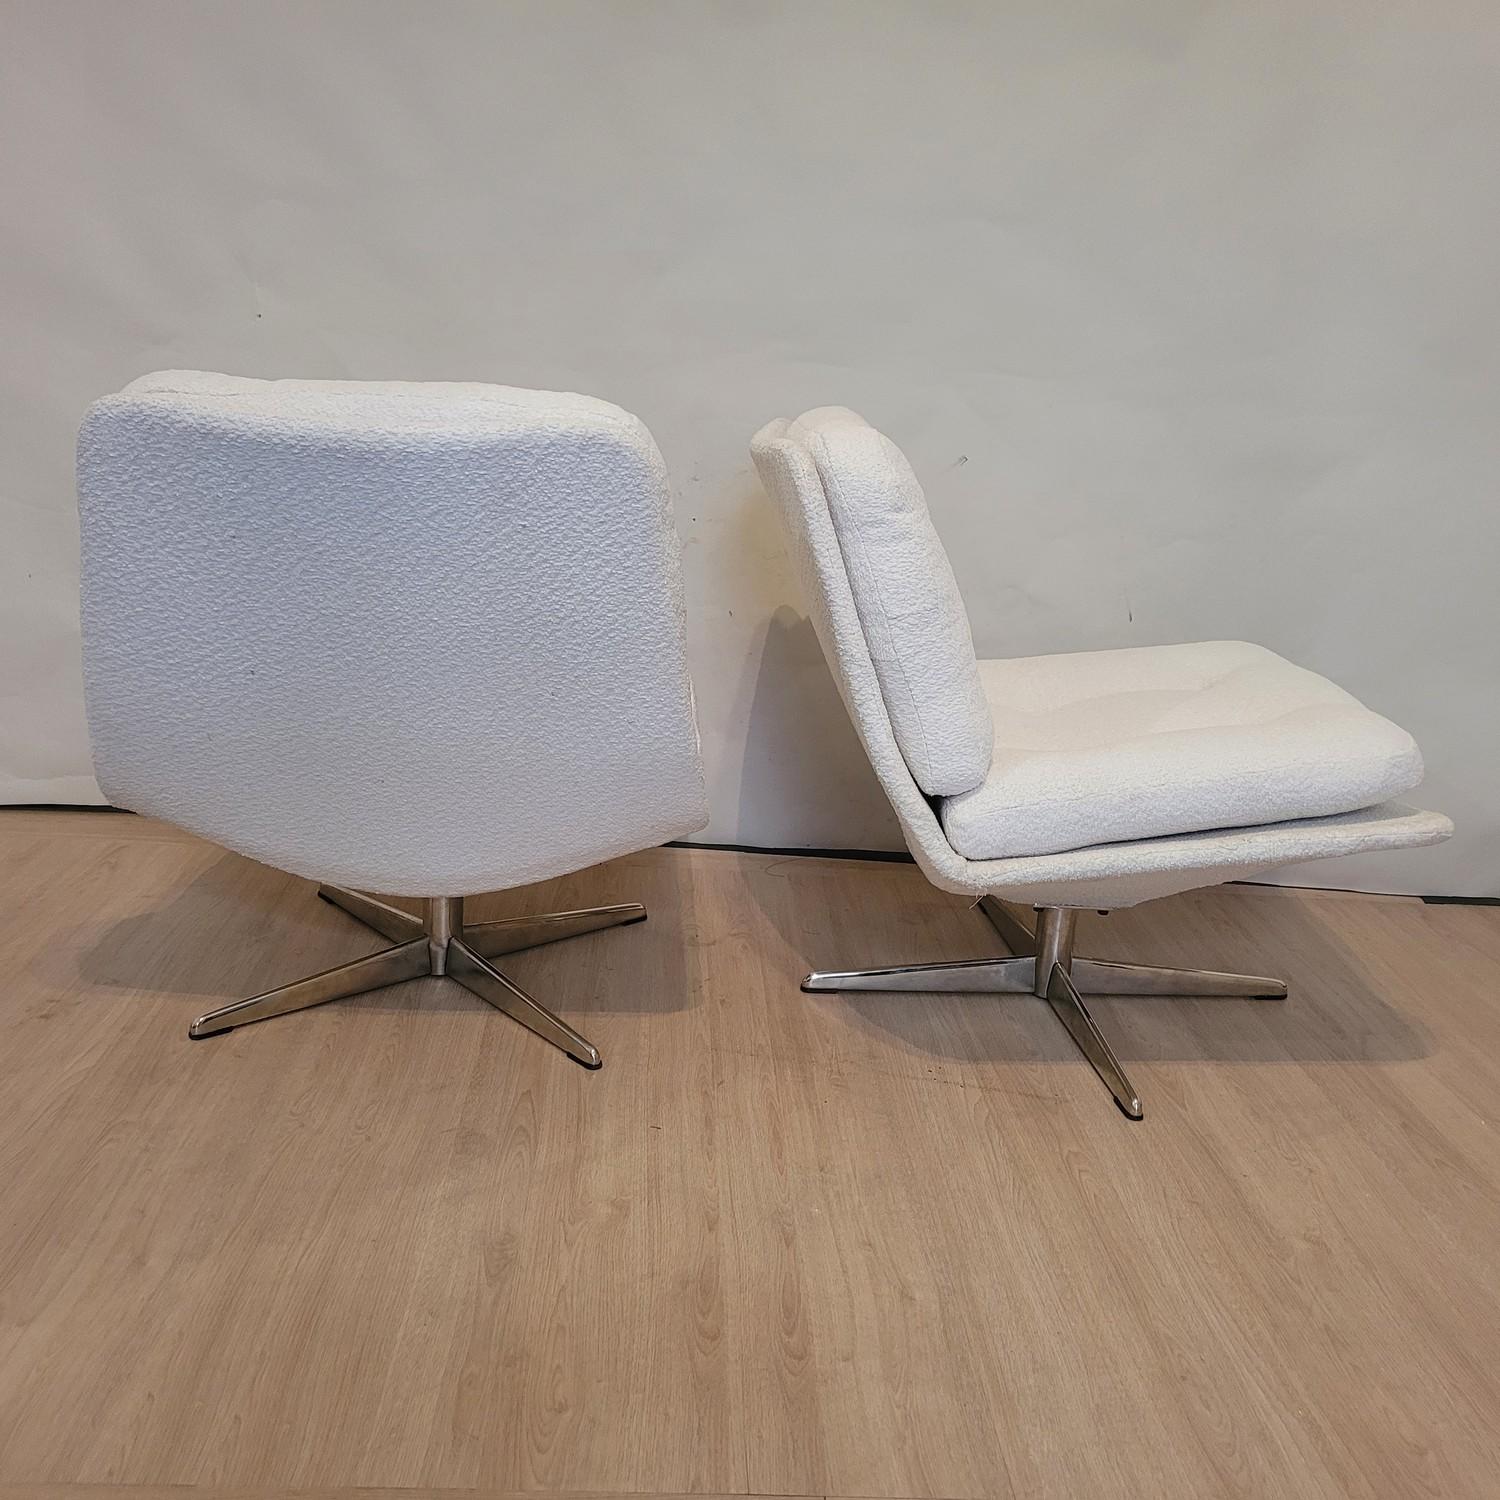 Pair Of Rotating Low Chairs, Bouclette Fabric, 20th Century For Sale 1